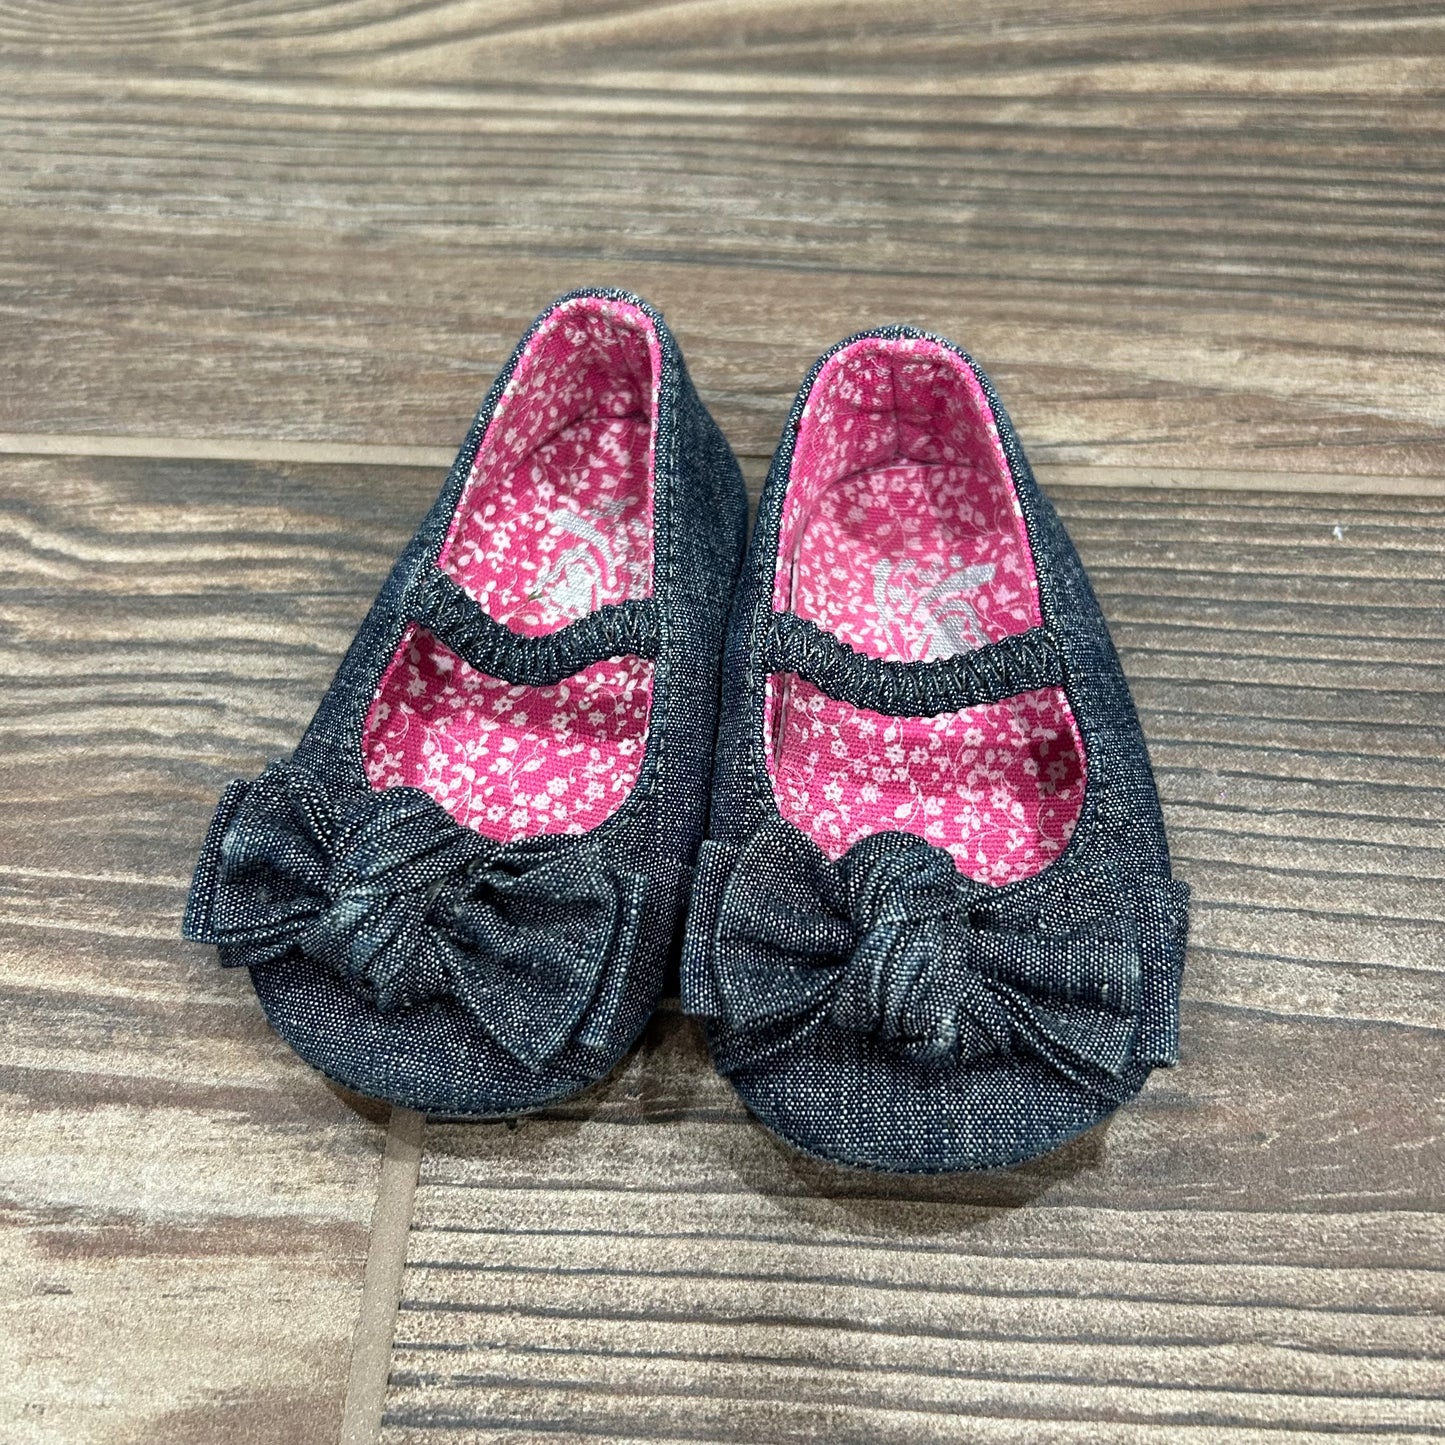 Size 6-12m (Infant) Chambray Bow Shoes - Good Used Condition